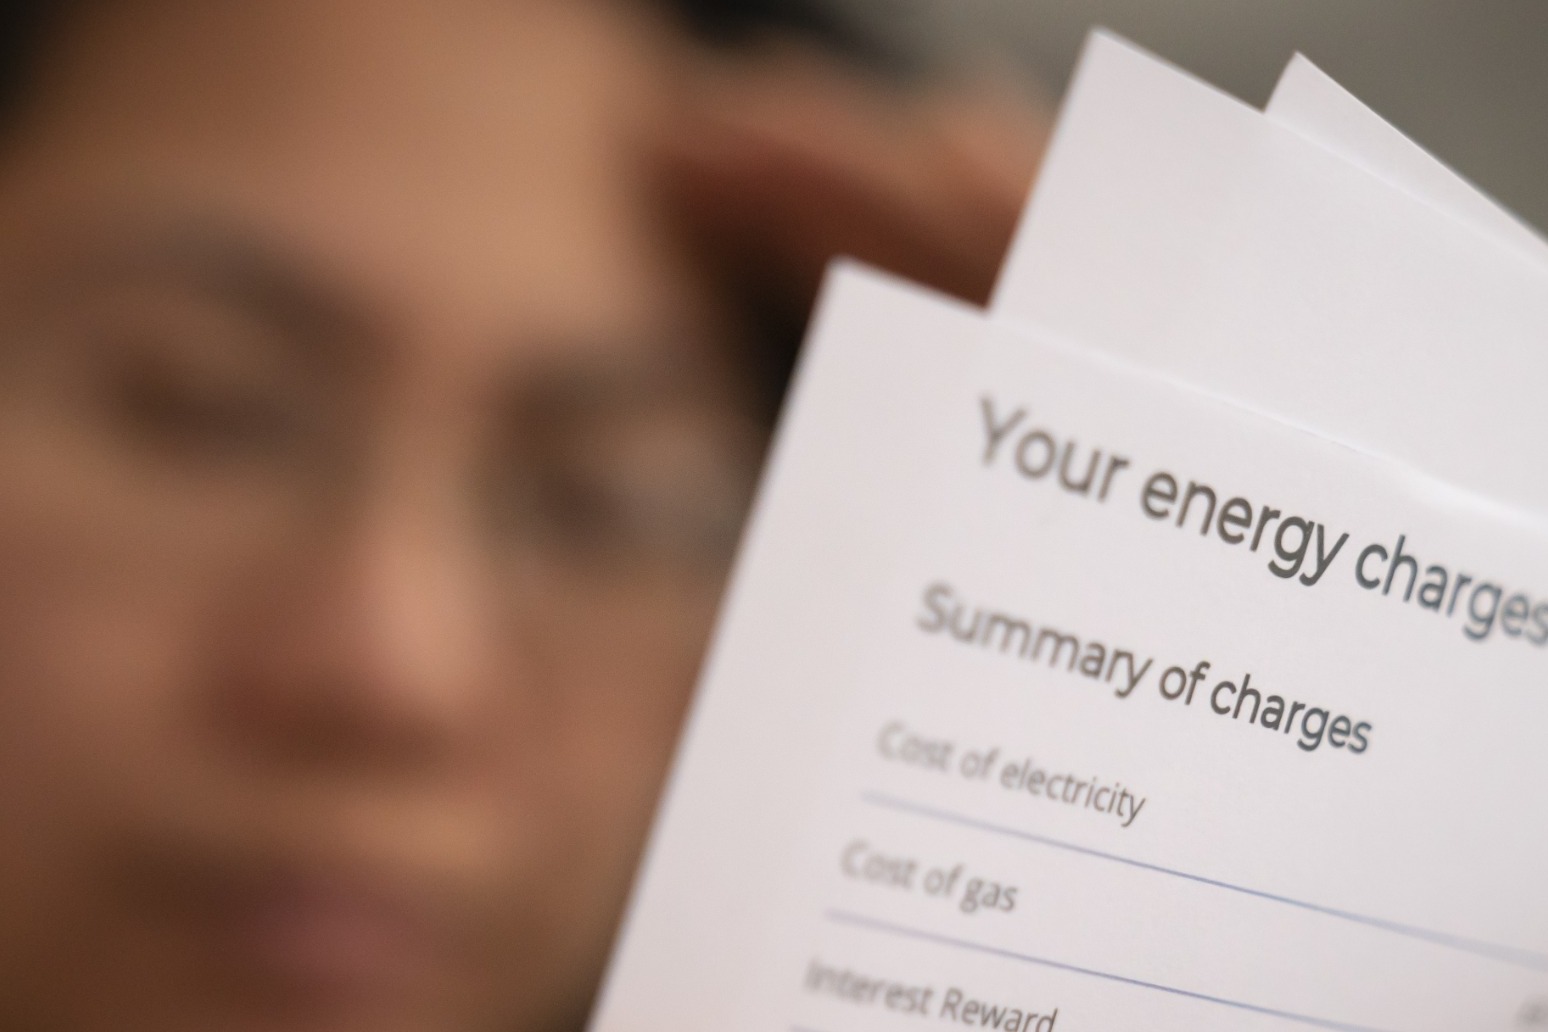 Households could get £150 energy rebate quicker with direct debit, say councils 